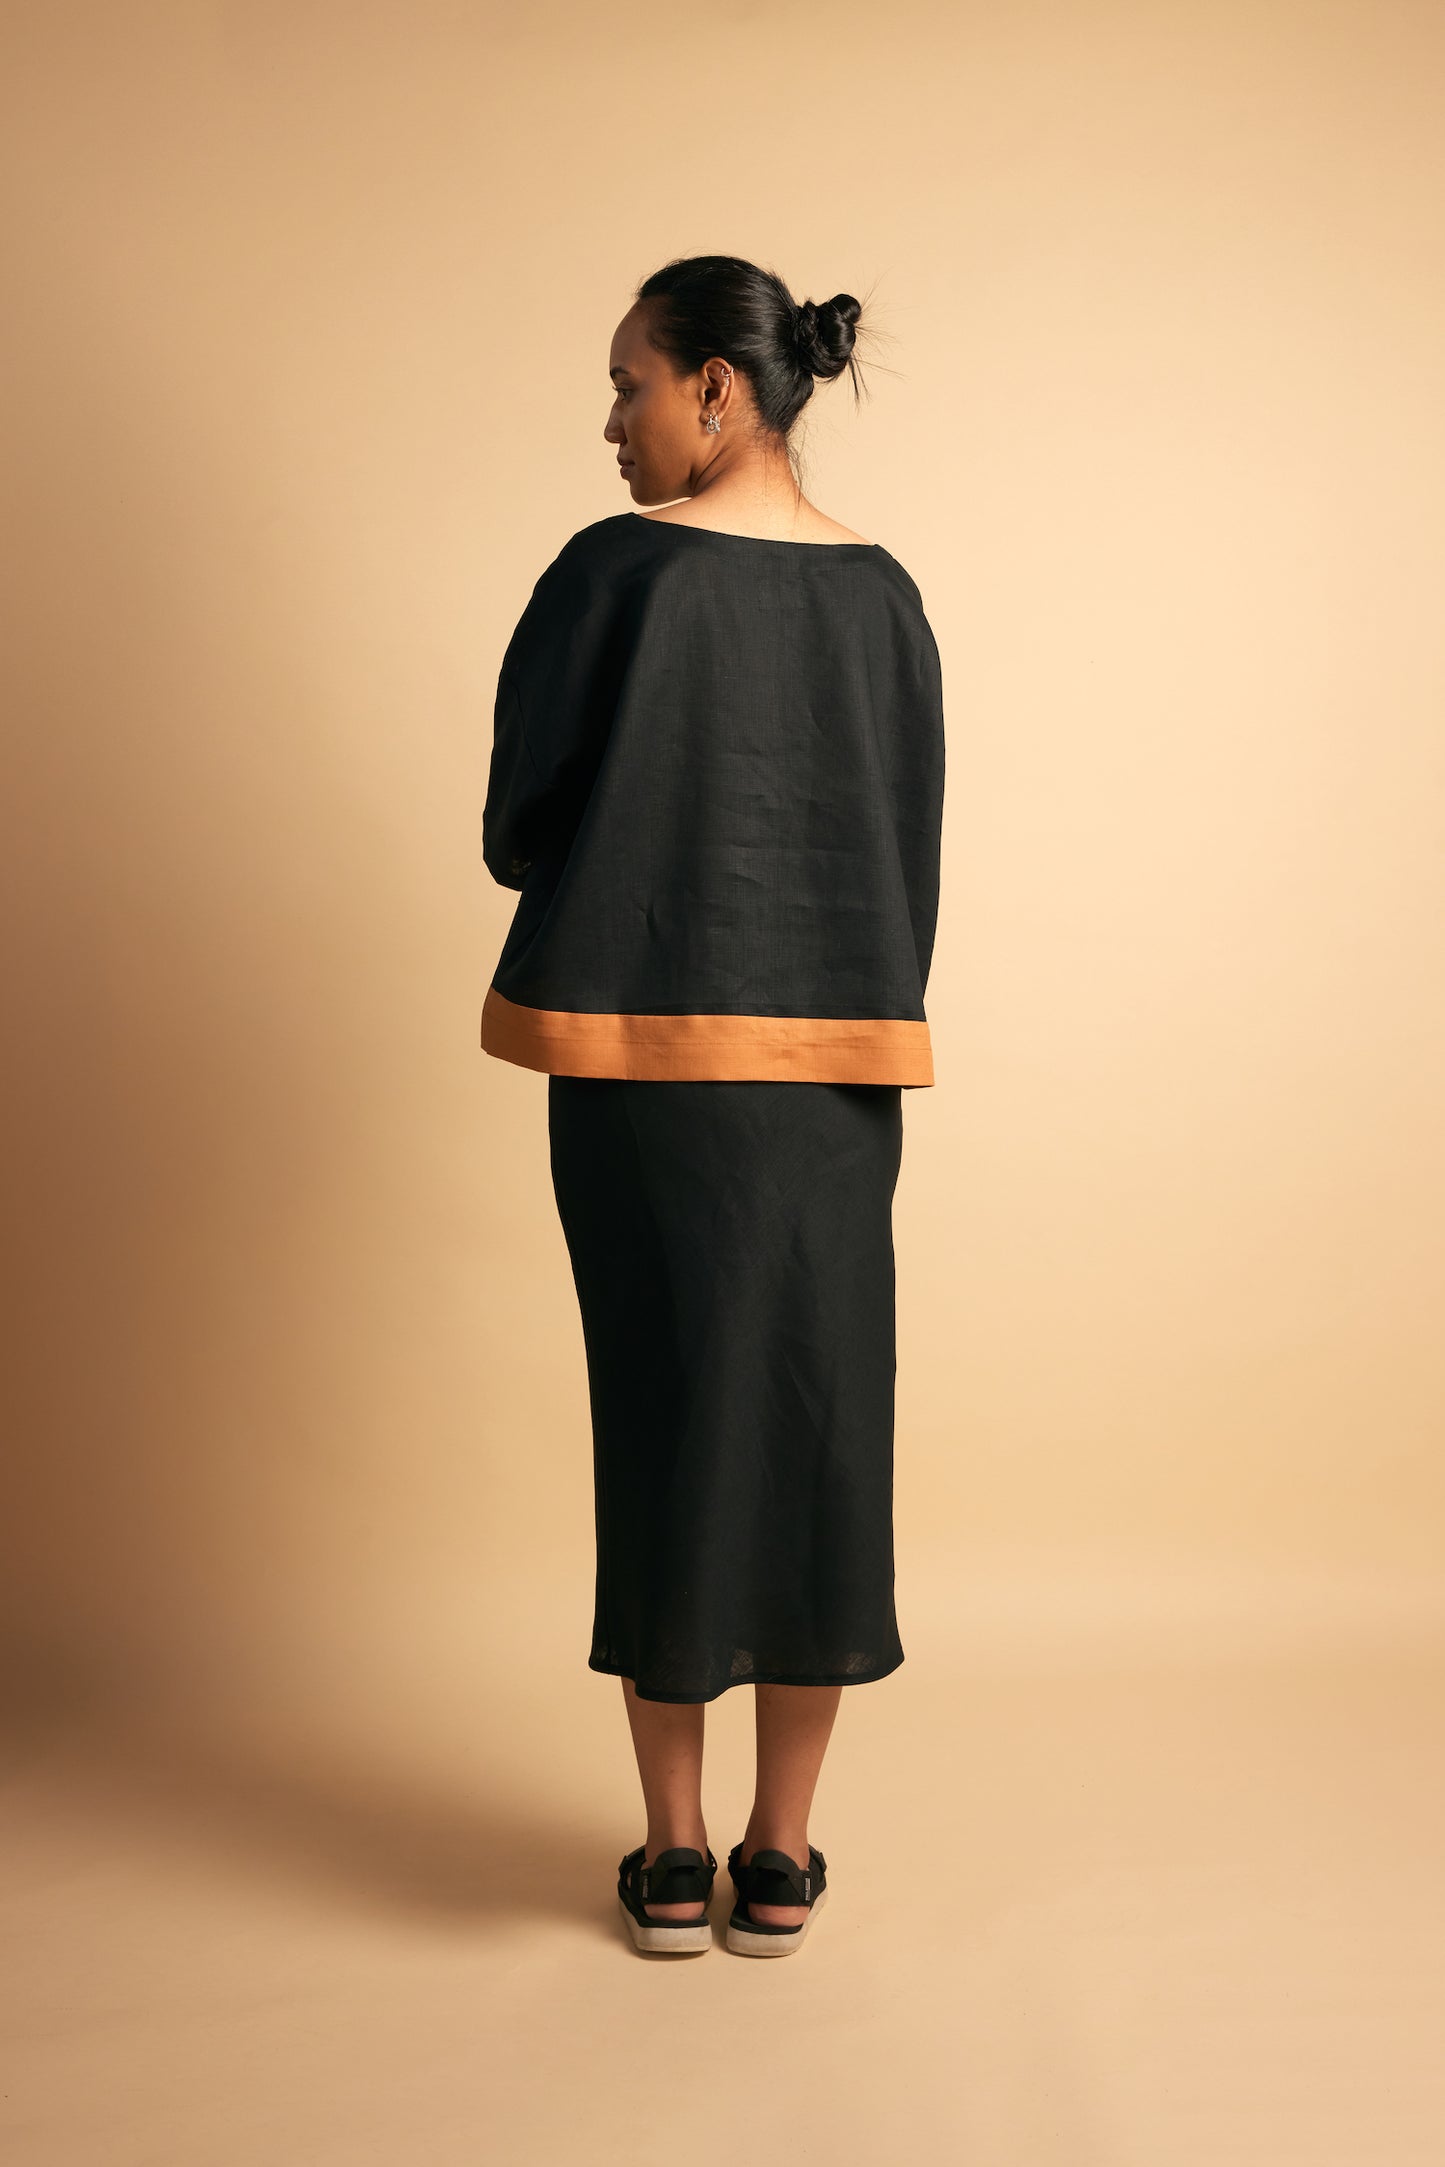 Tongan woman, girl standing in front of beige wall wearing black linen top with orange hem and matching black linen bias cut skirt